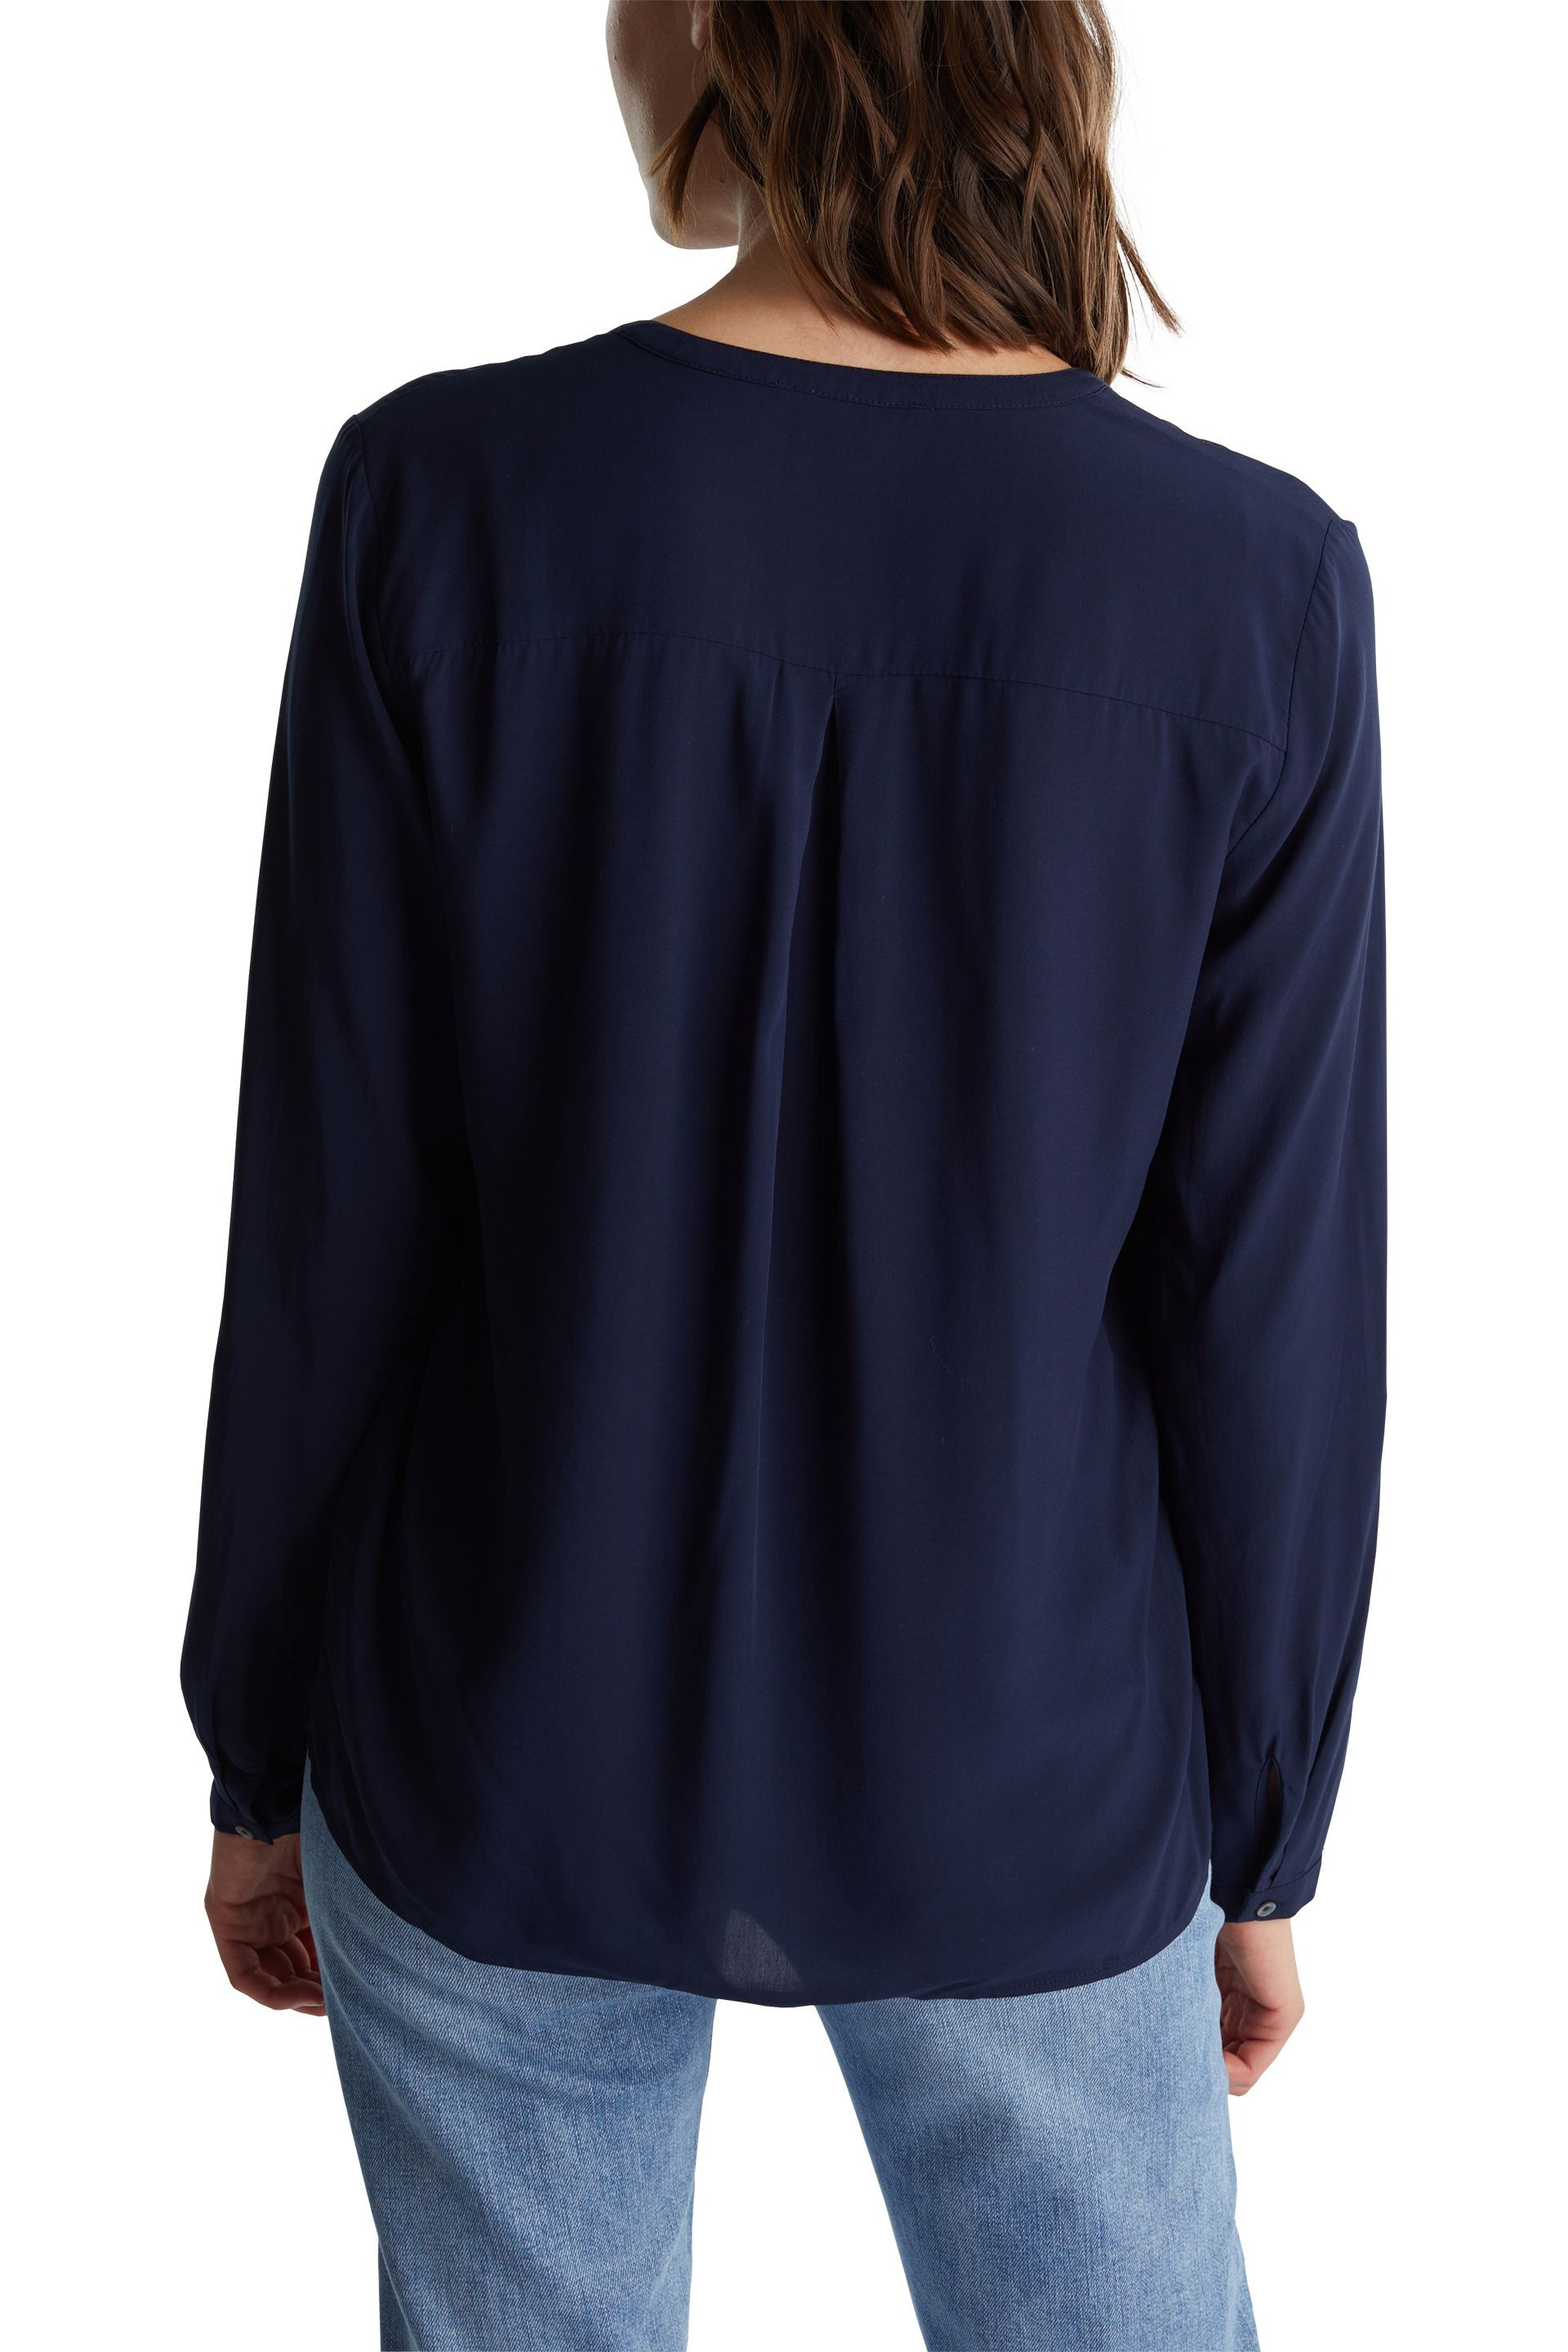 Blouse with adjustable sleeves, Blue, large image number 2